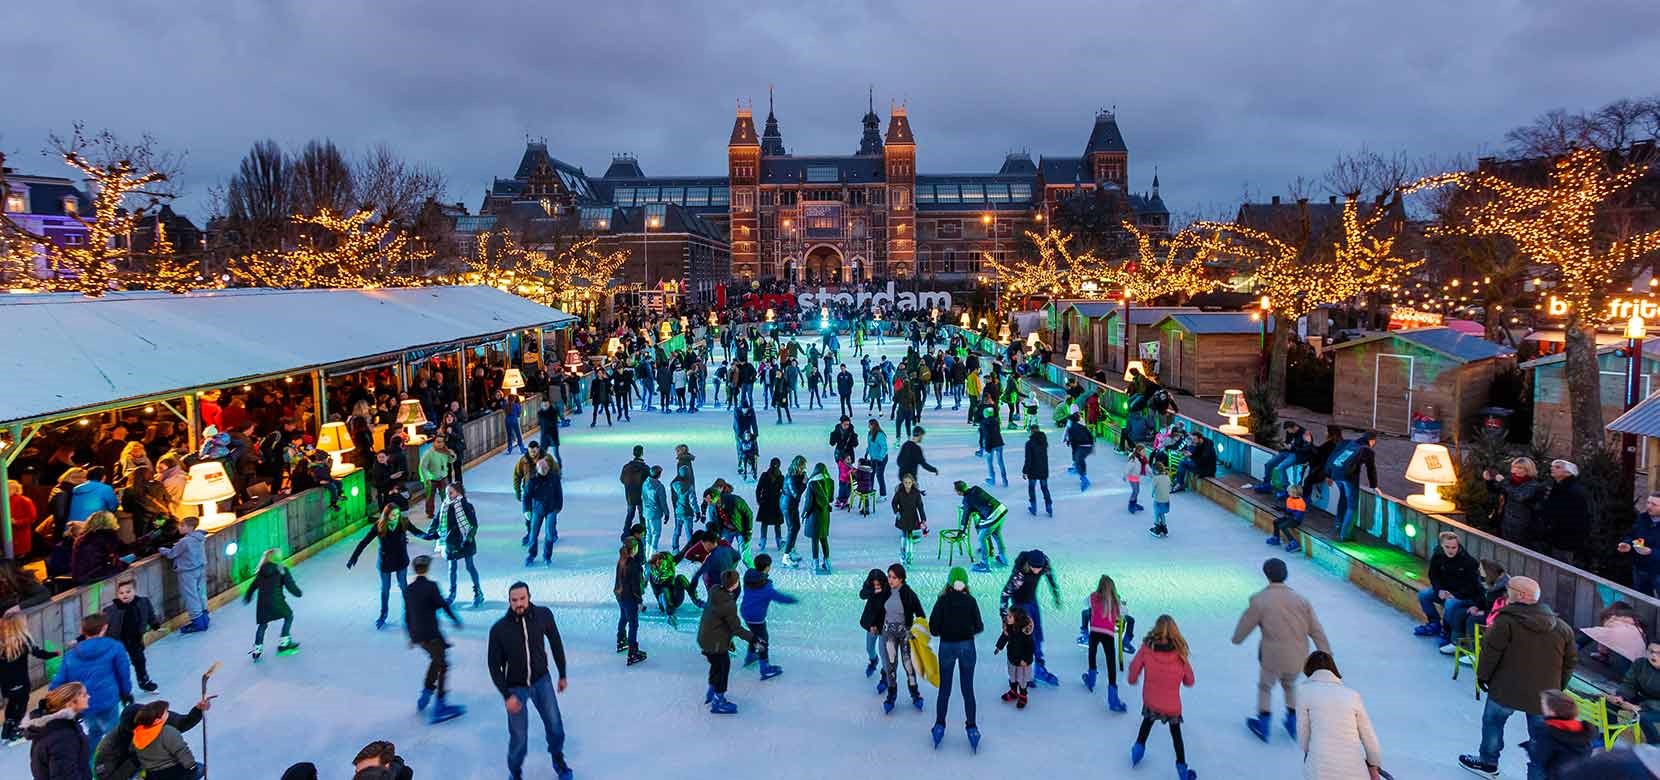 The most famous ice rink in the world